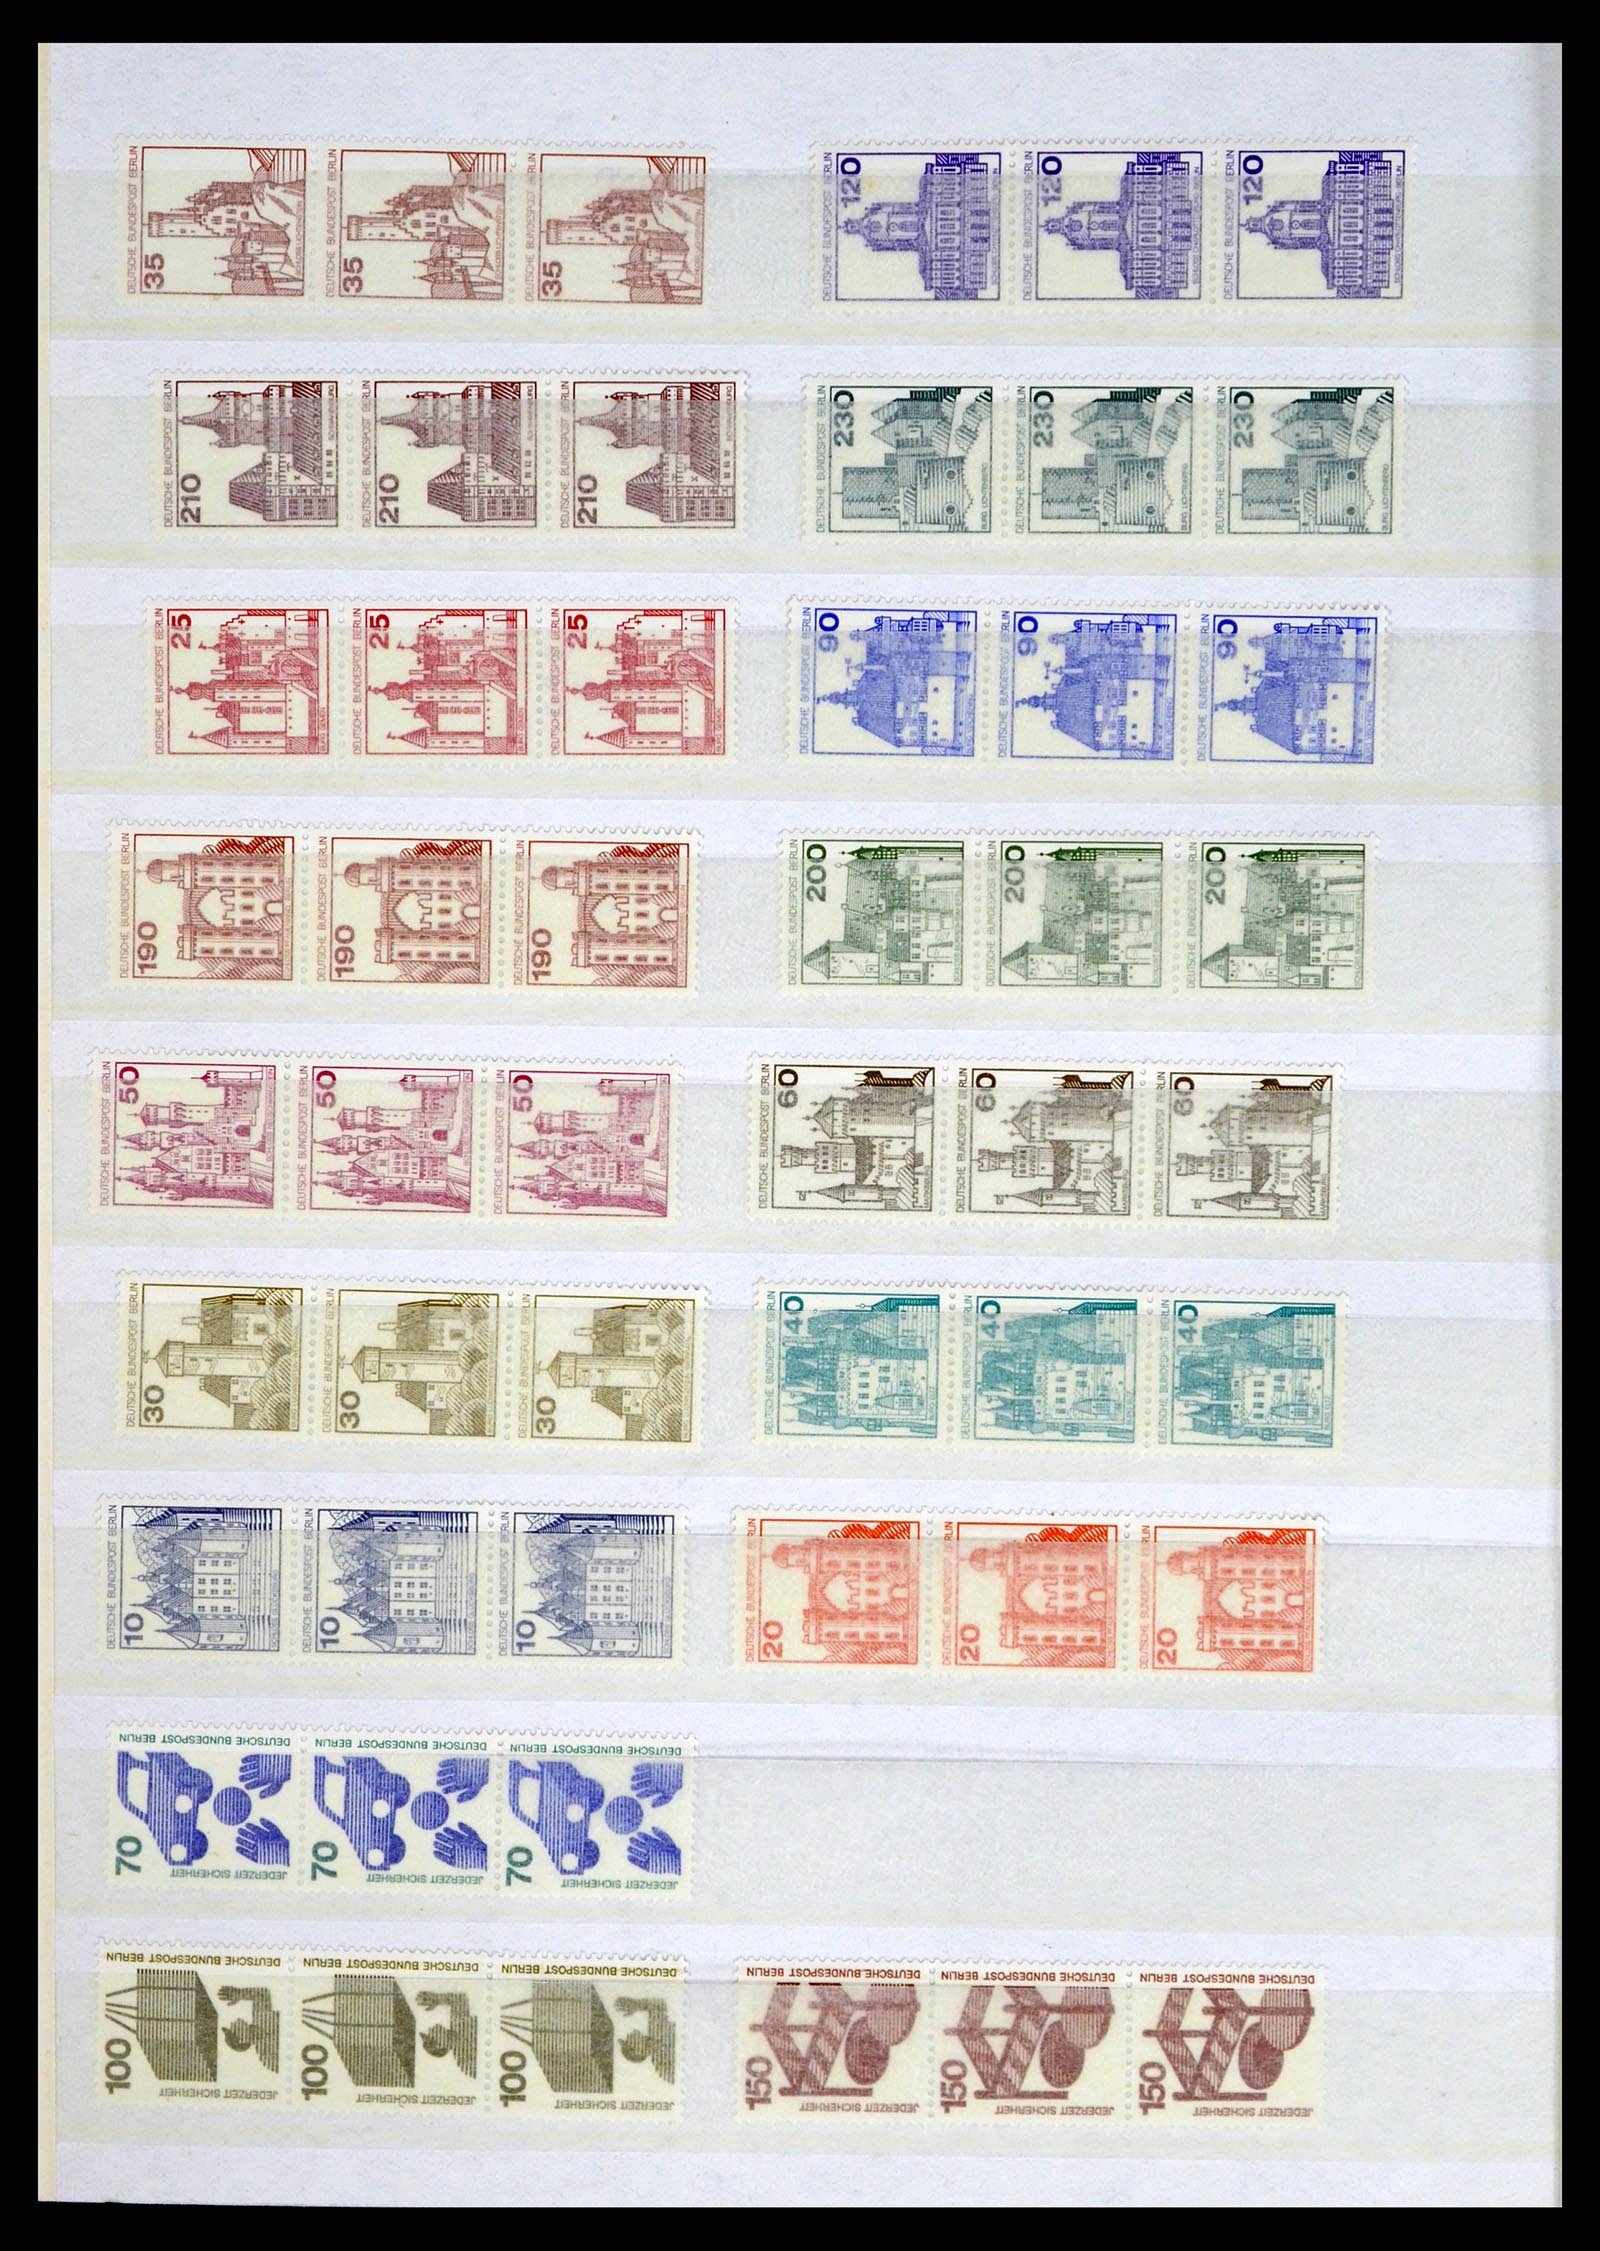 37354 085 - Stamp collection 37354 Bundespost and Berlin 1955-2000.